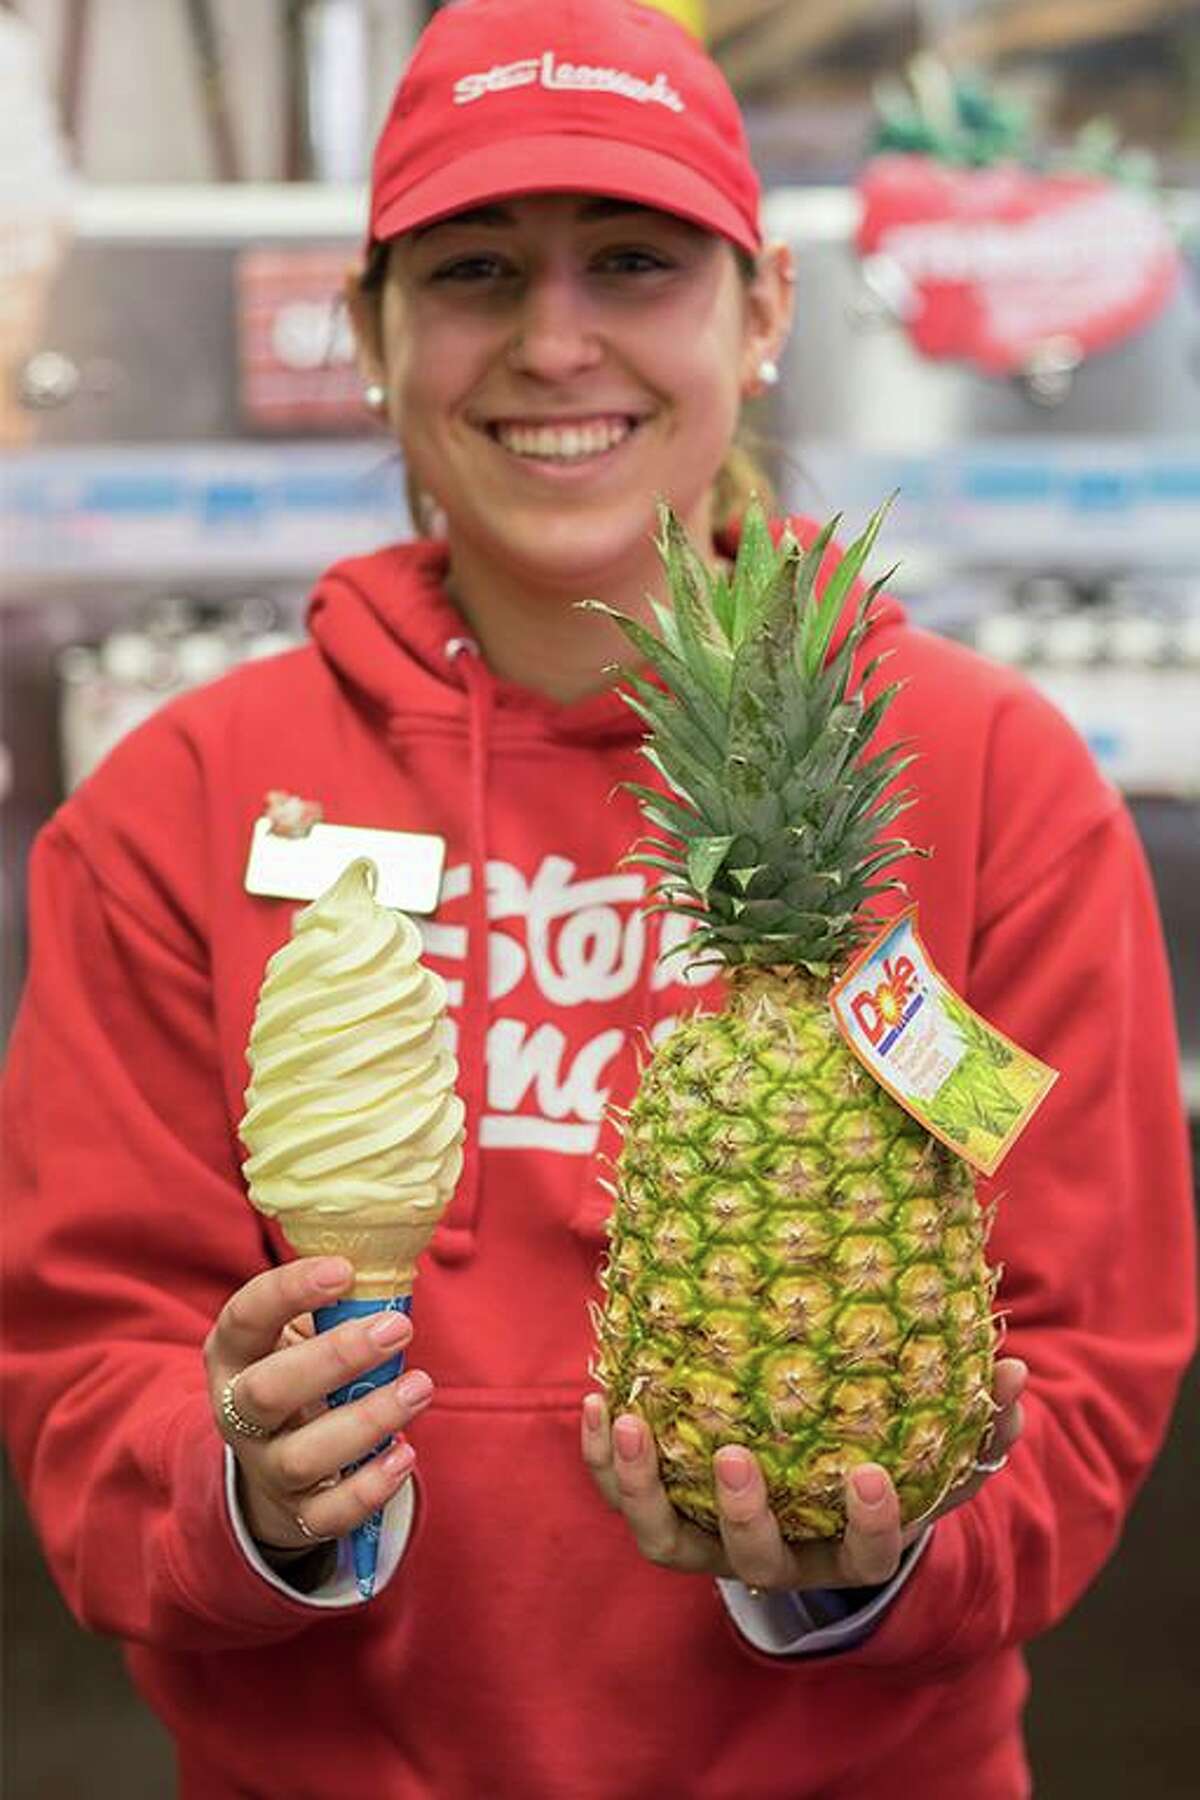 Stew Leonard's recently launched Dole Pineapple Whip at most of its locations.  